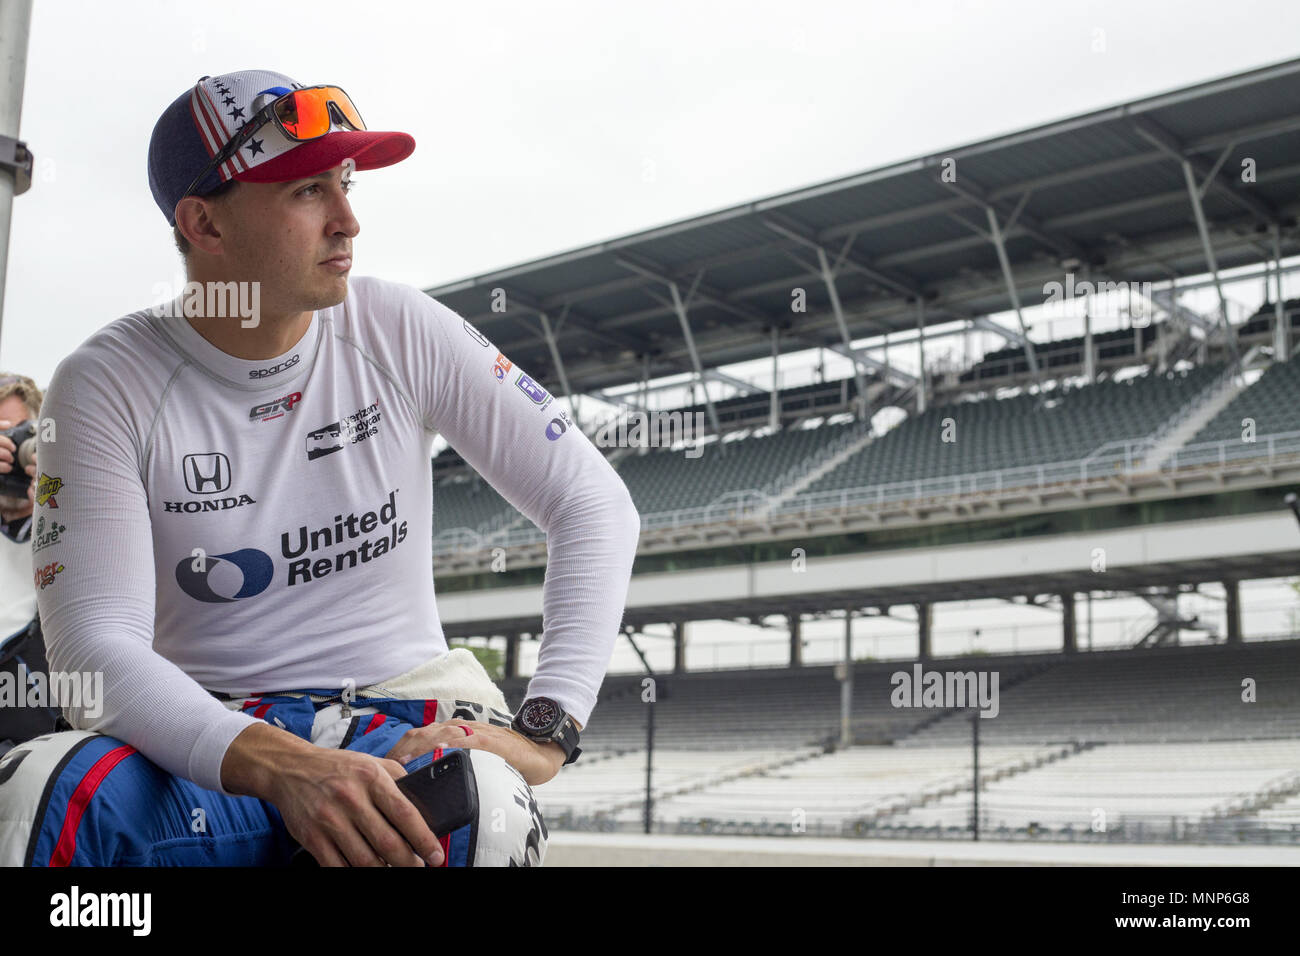 Indianapolis, Indiana, USA. 18th May, 2018. GRAHAM RAHAL (15) of the United States hangs out at his pit stall during ''Fast Friday'' practice for the Indianapolis 500 at the Indianapolis Motor Speedway in Indianapolis, Indiana. Credit: Chris Owens Asp Inc/ASP/ZUMA Wire/Alamy Live News Stock Photo